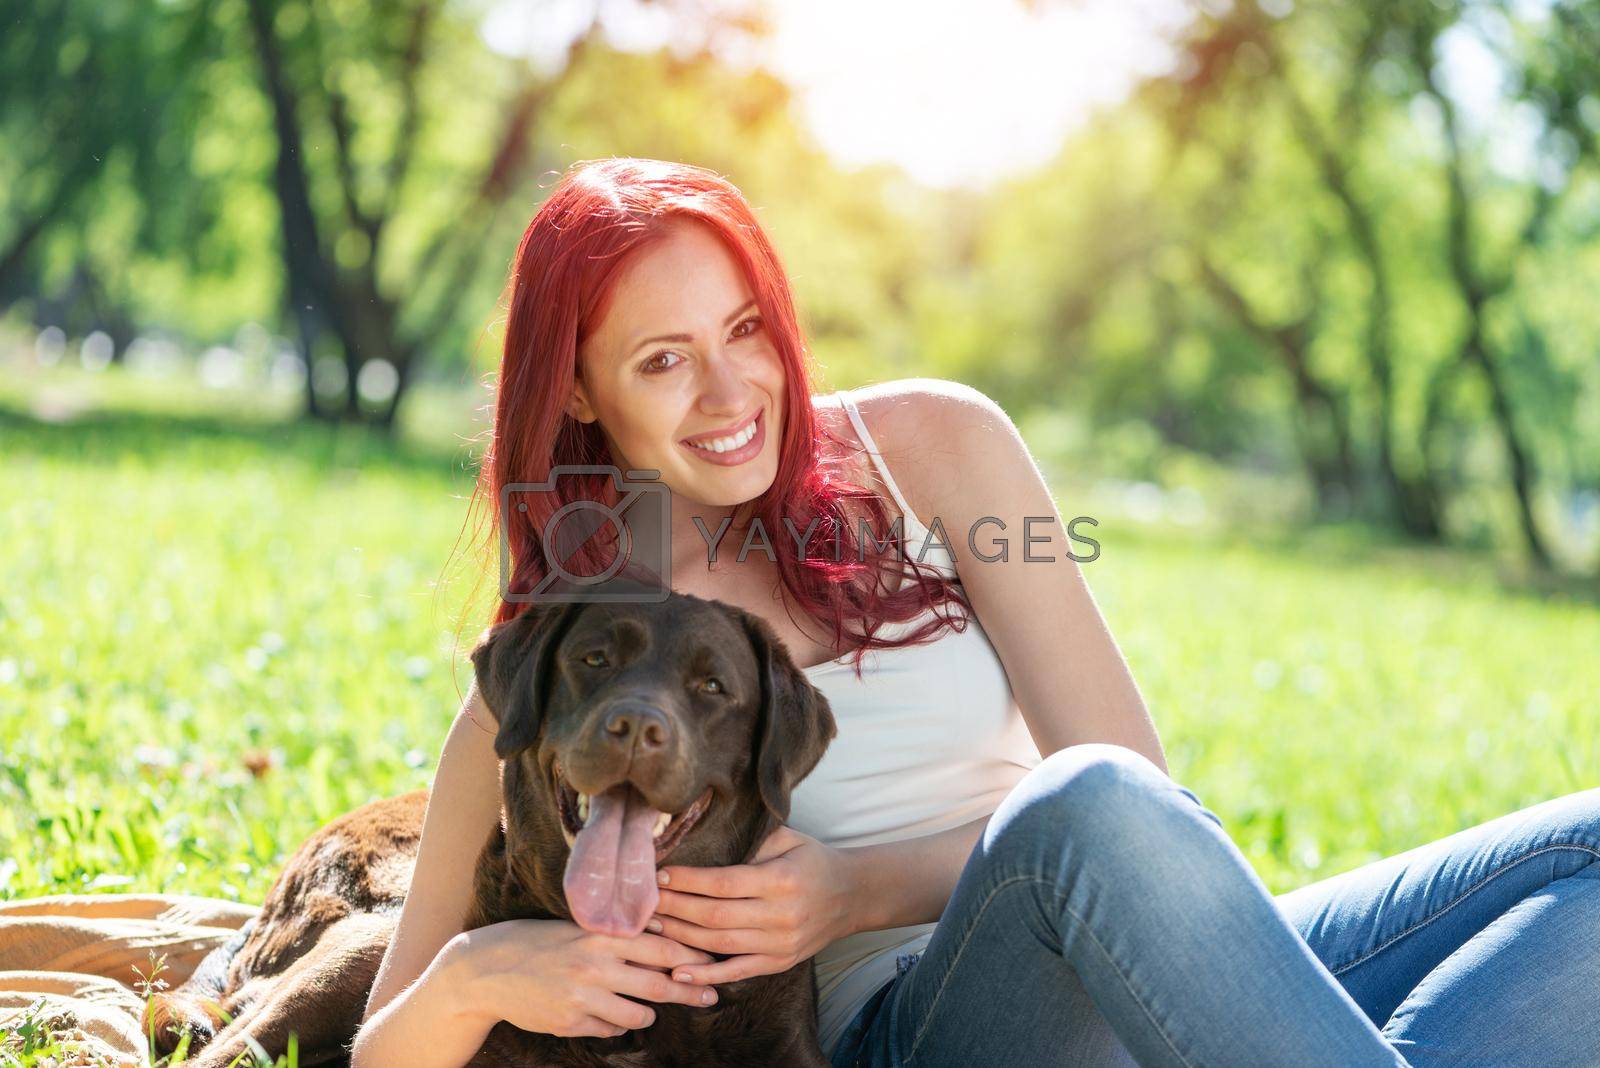 Woman in the park hugs a dog. Spend time with pets